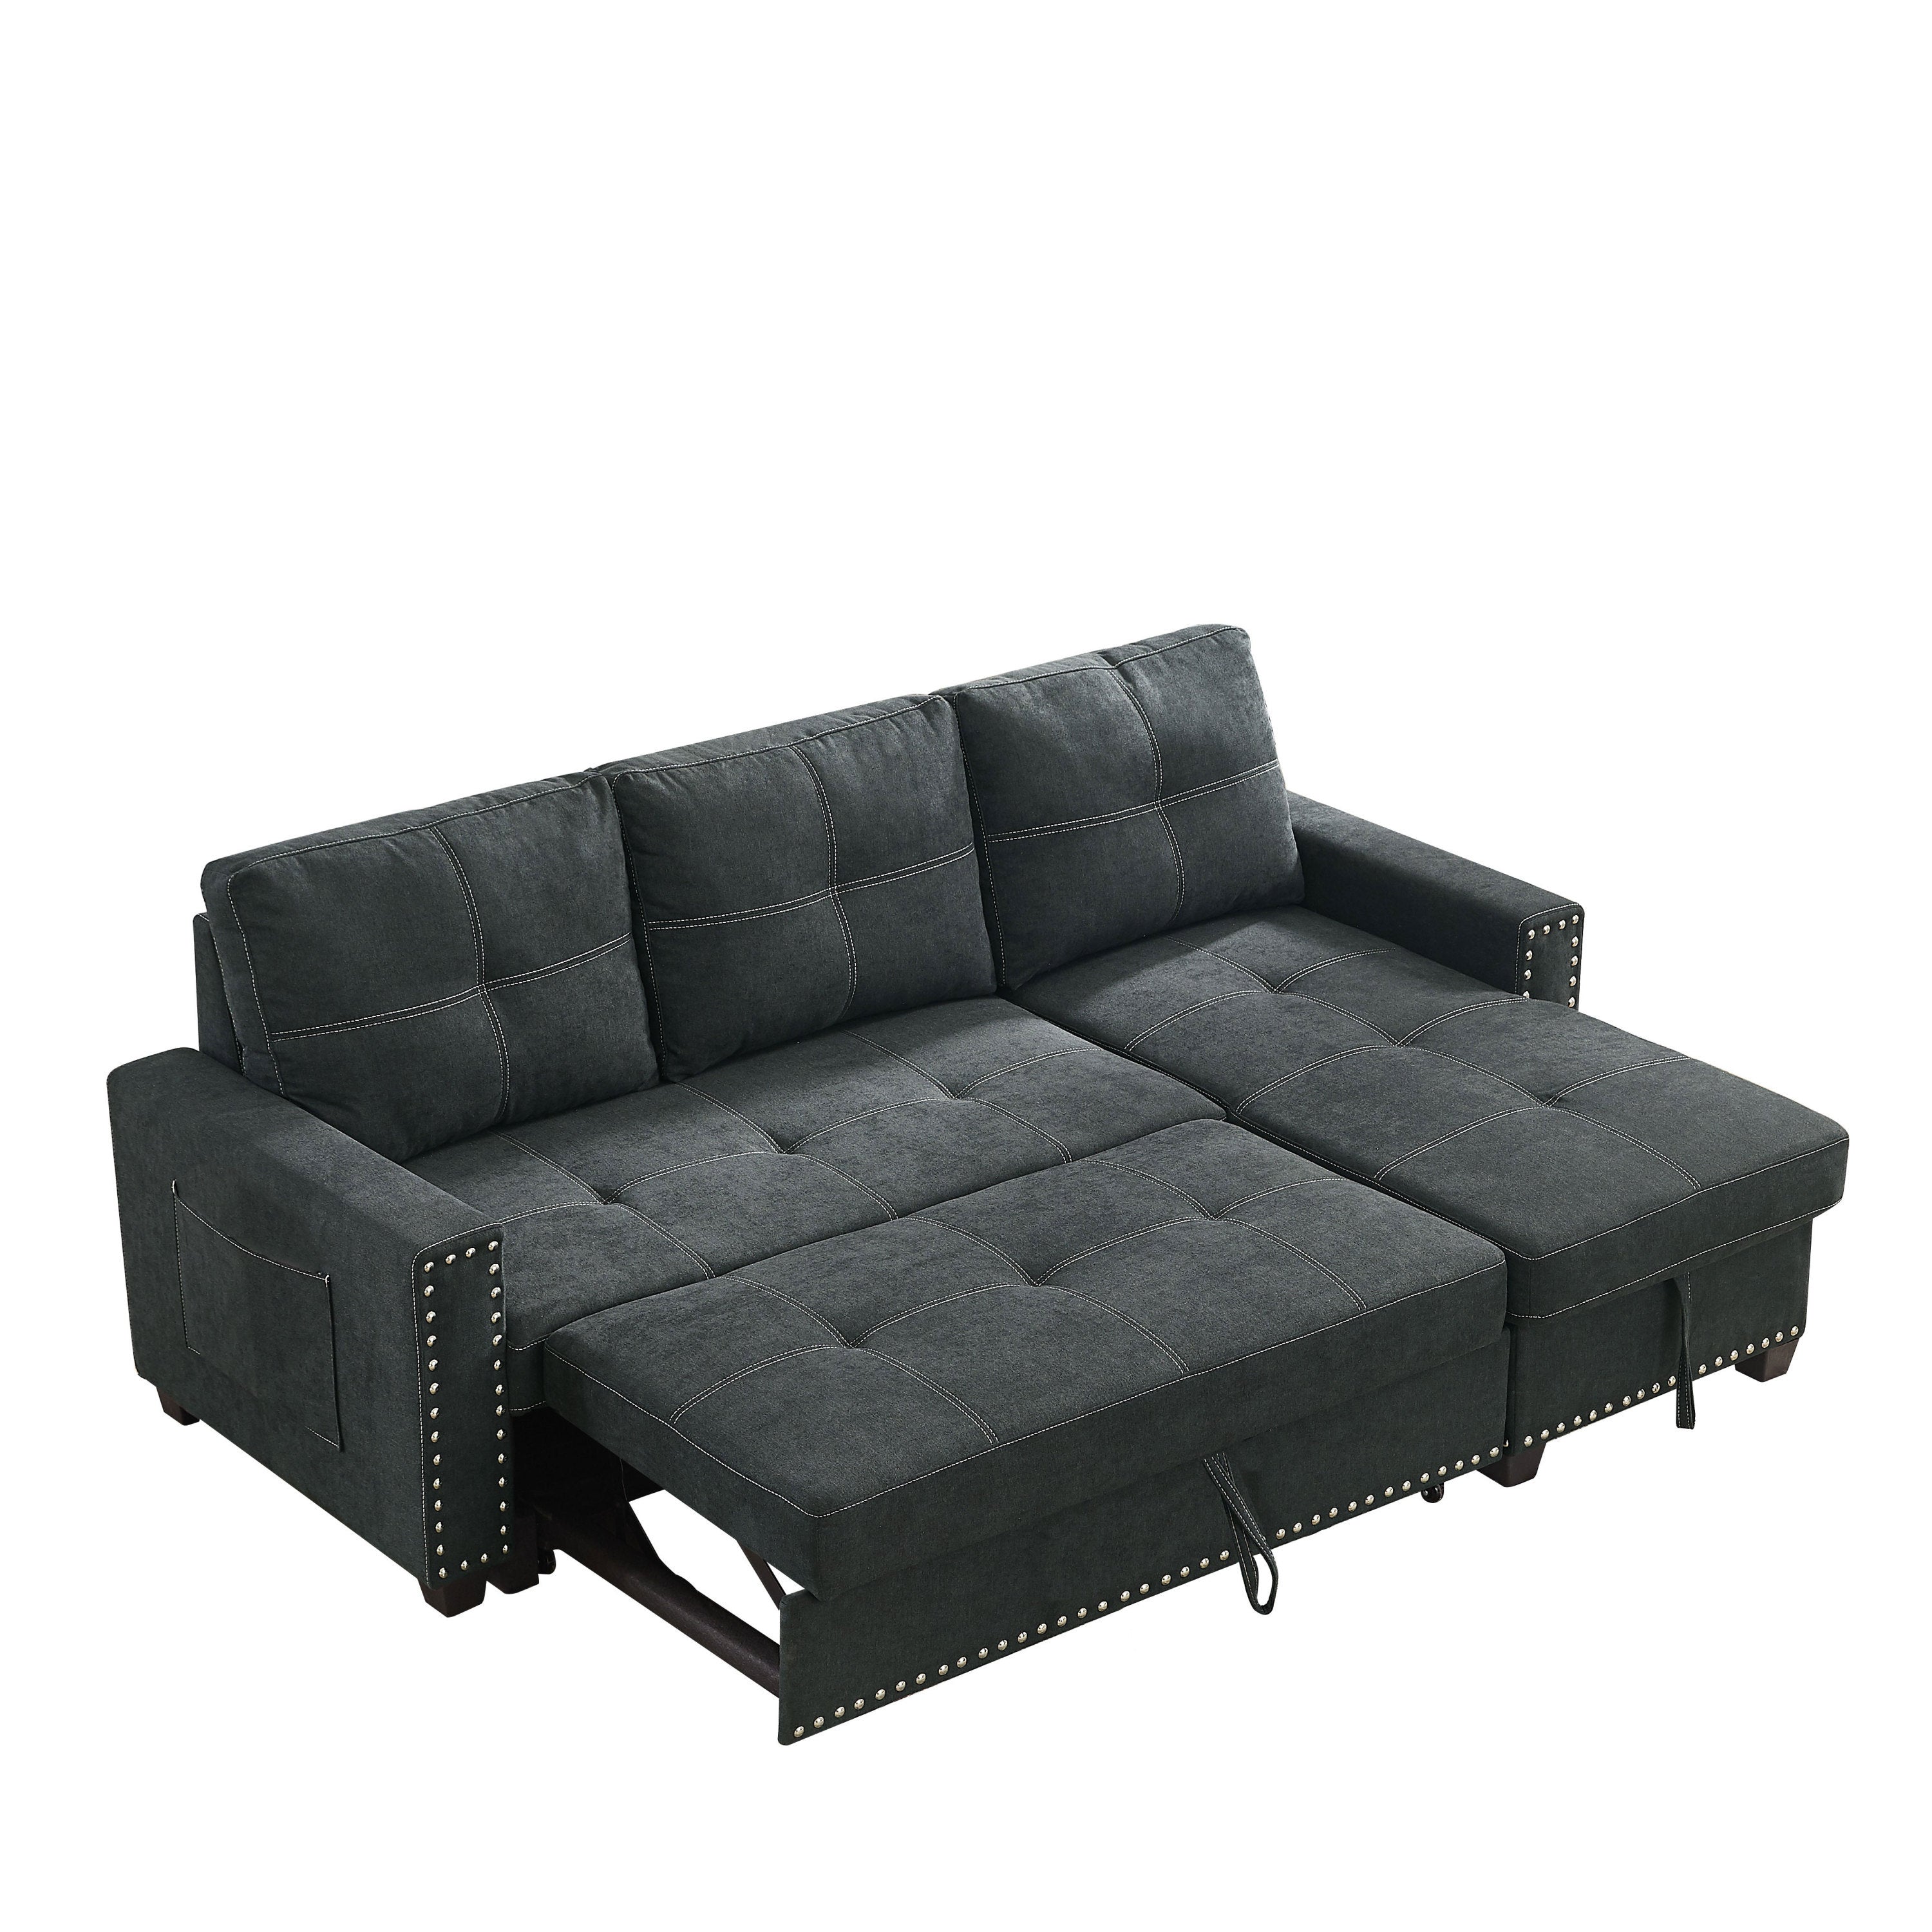 82" Reversible Sleeper Sectional w/ Storage-Sleeper Sectionals-American Furniture Outlet